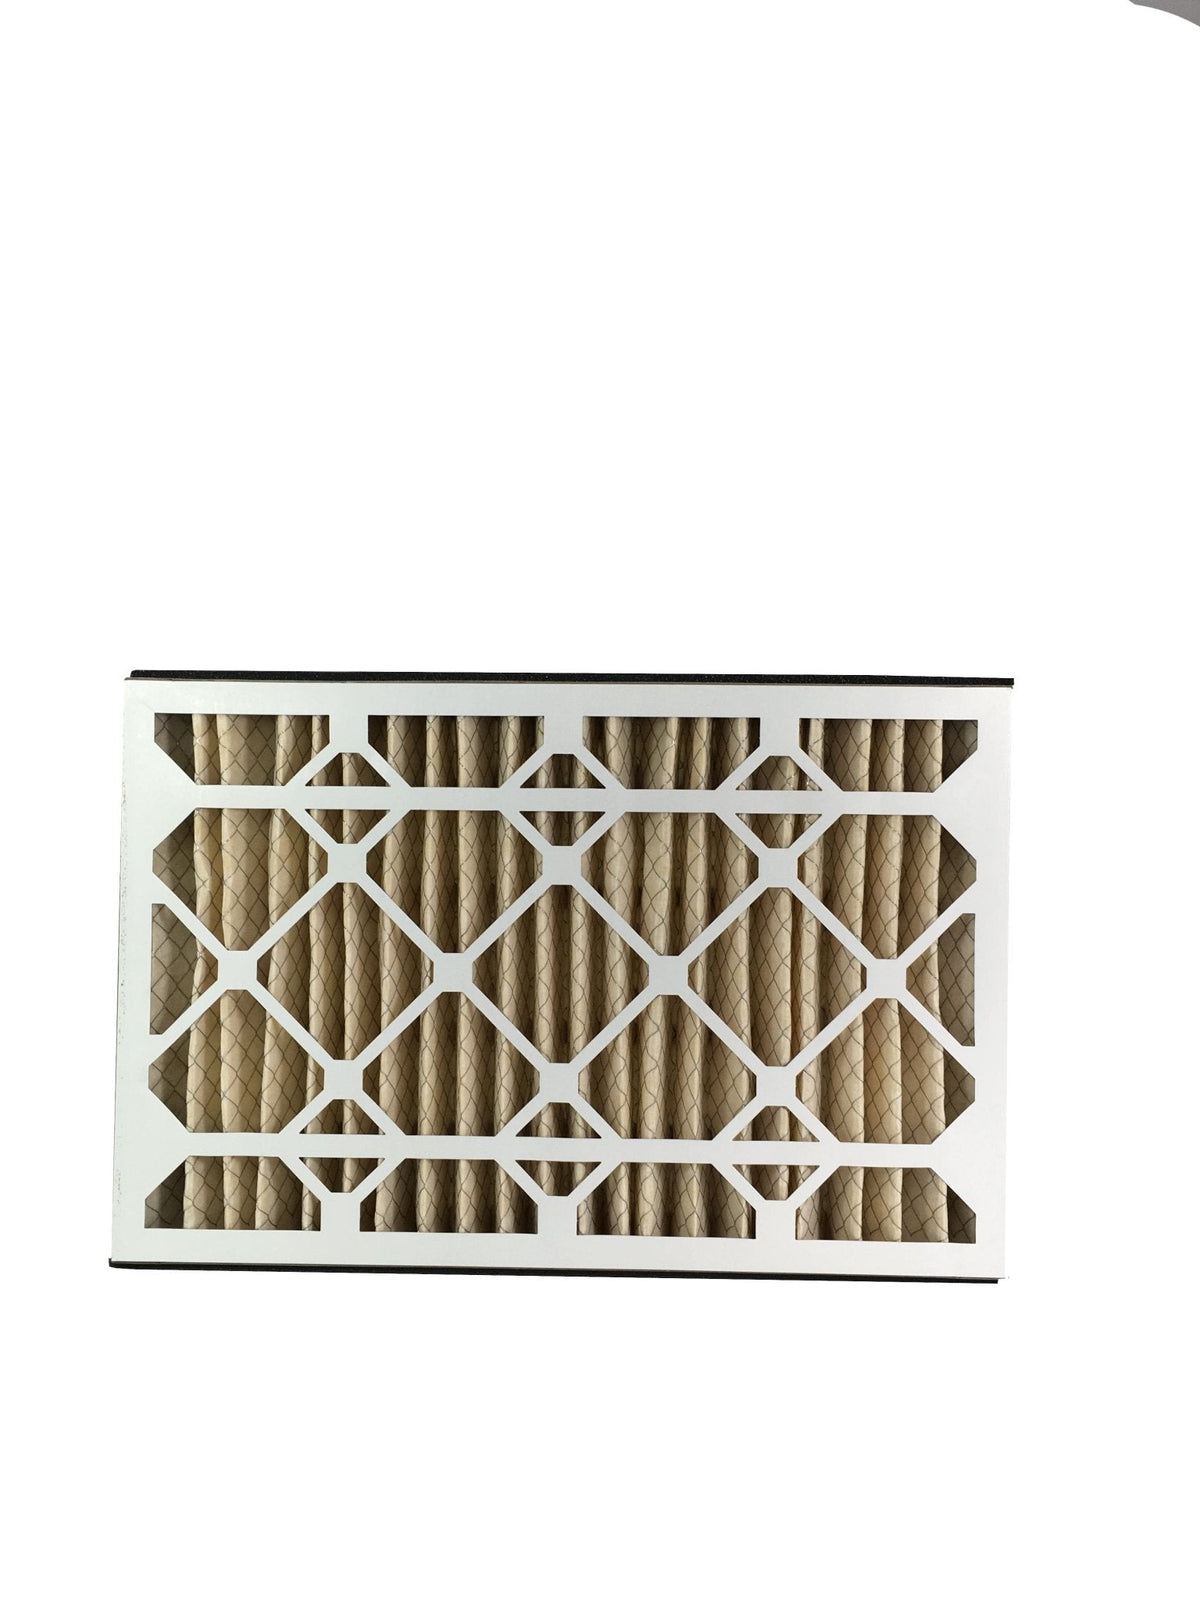 Ultravation 91-007 16x25x3 MERV 11 Replacement for Furnace Filter - 1 Pack